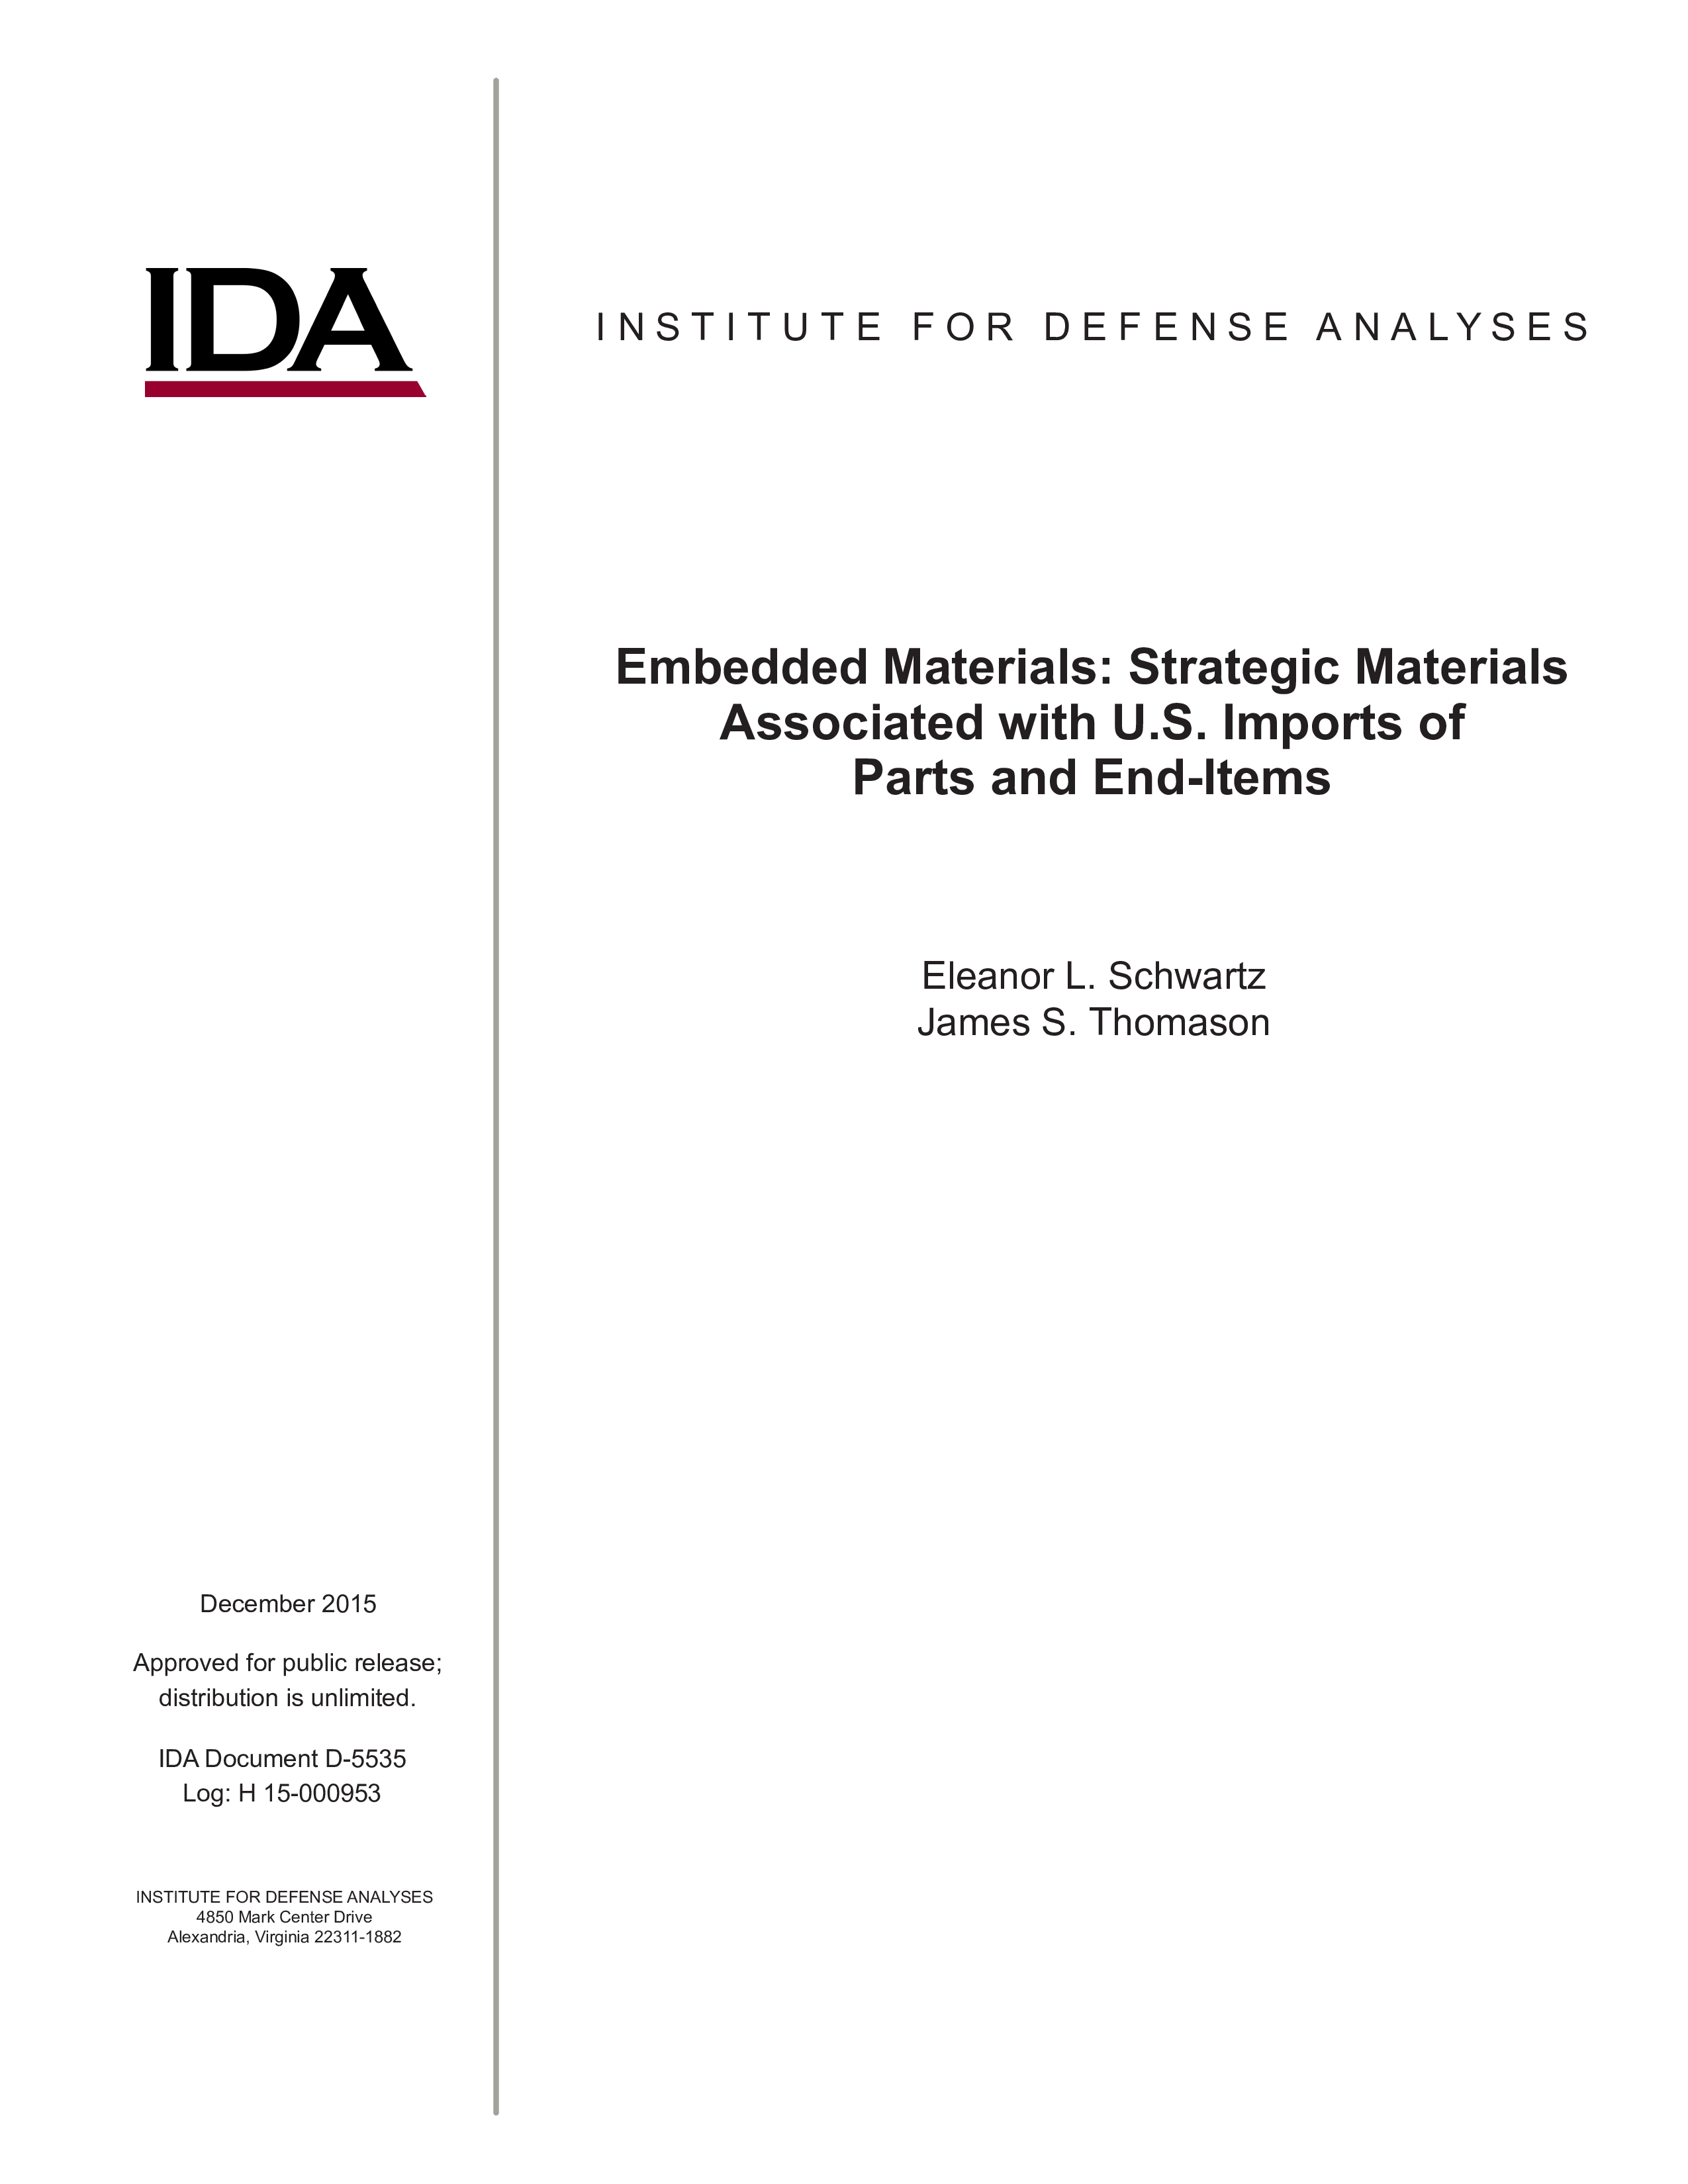 Embedded Materials: Strategic Materials Associated with U.S. Imports of Parts and End-Items